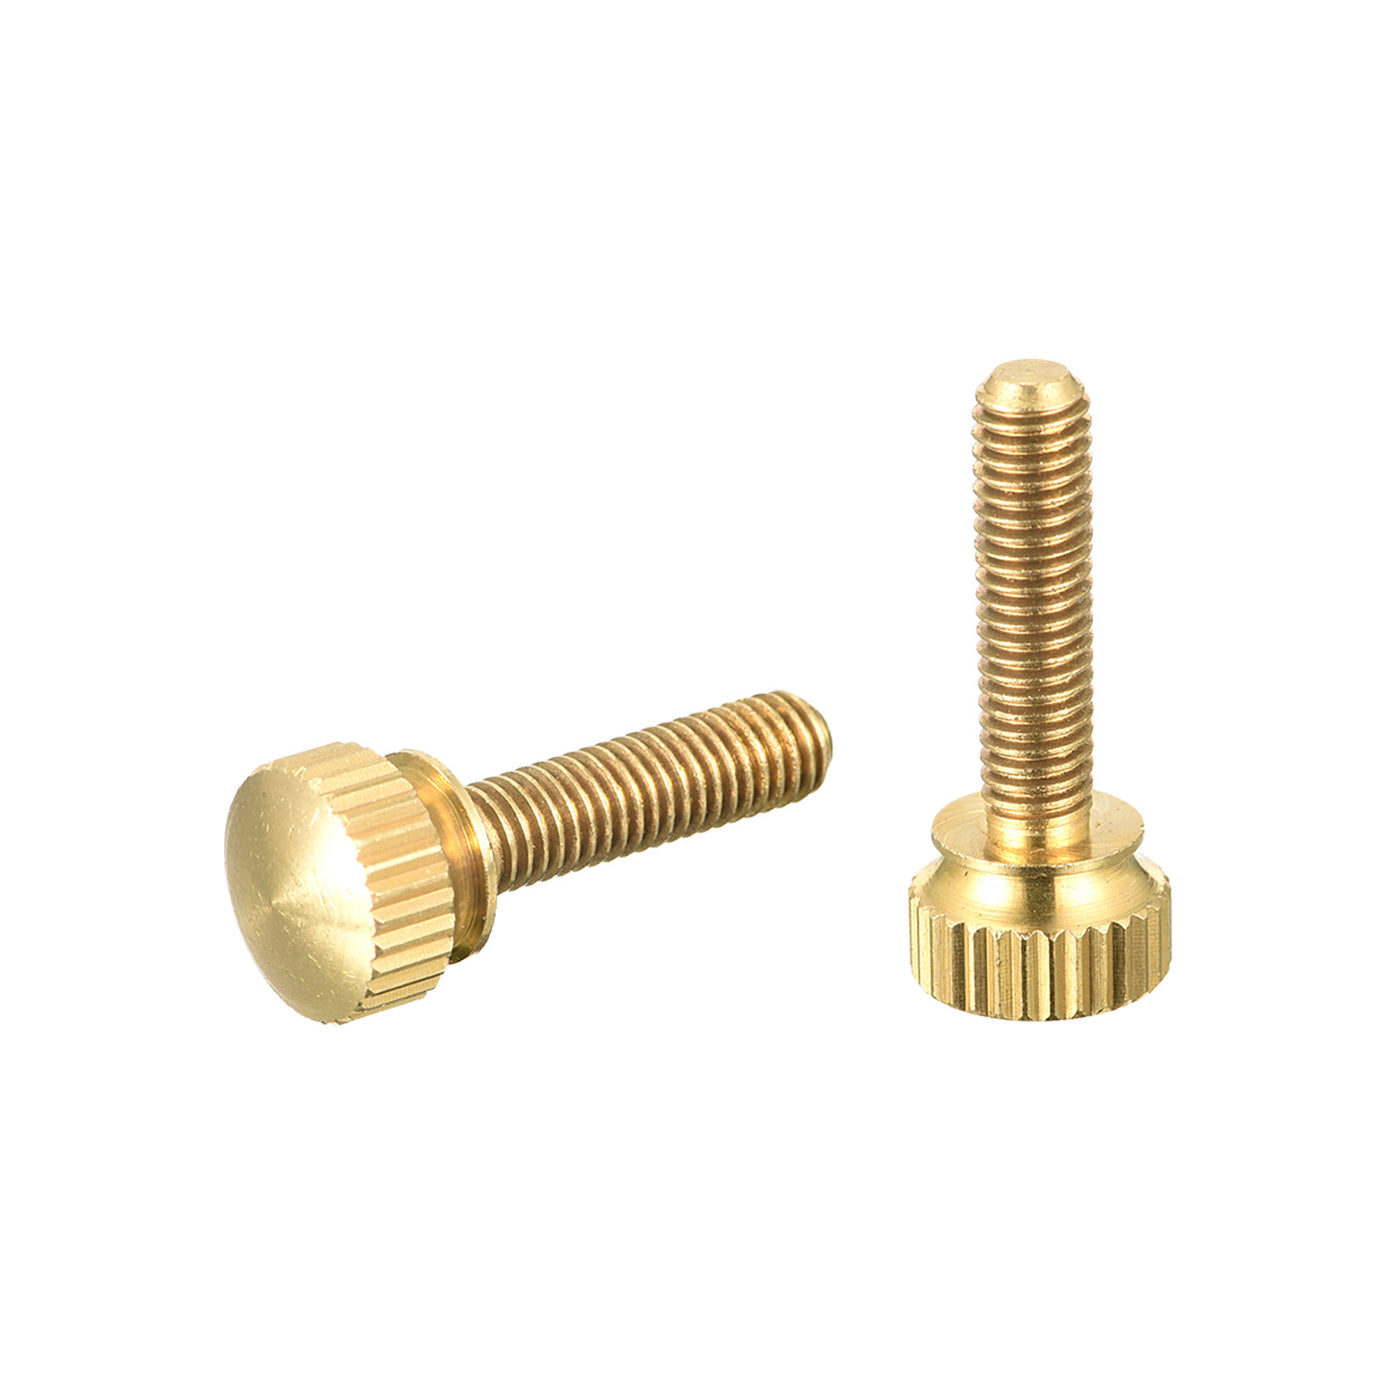 uxcell Uxcell 2Pcs Knurled Thumb Screws, M5x20mm Brass Shoulder Bolts Stepped Grip Knobs Fasteners for PC, Electronic, Mechanical